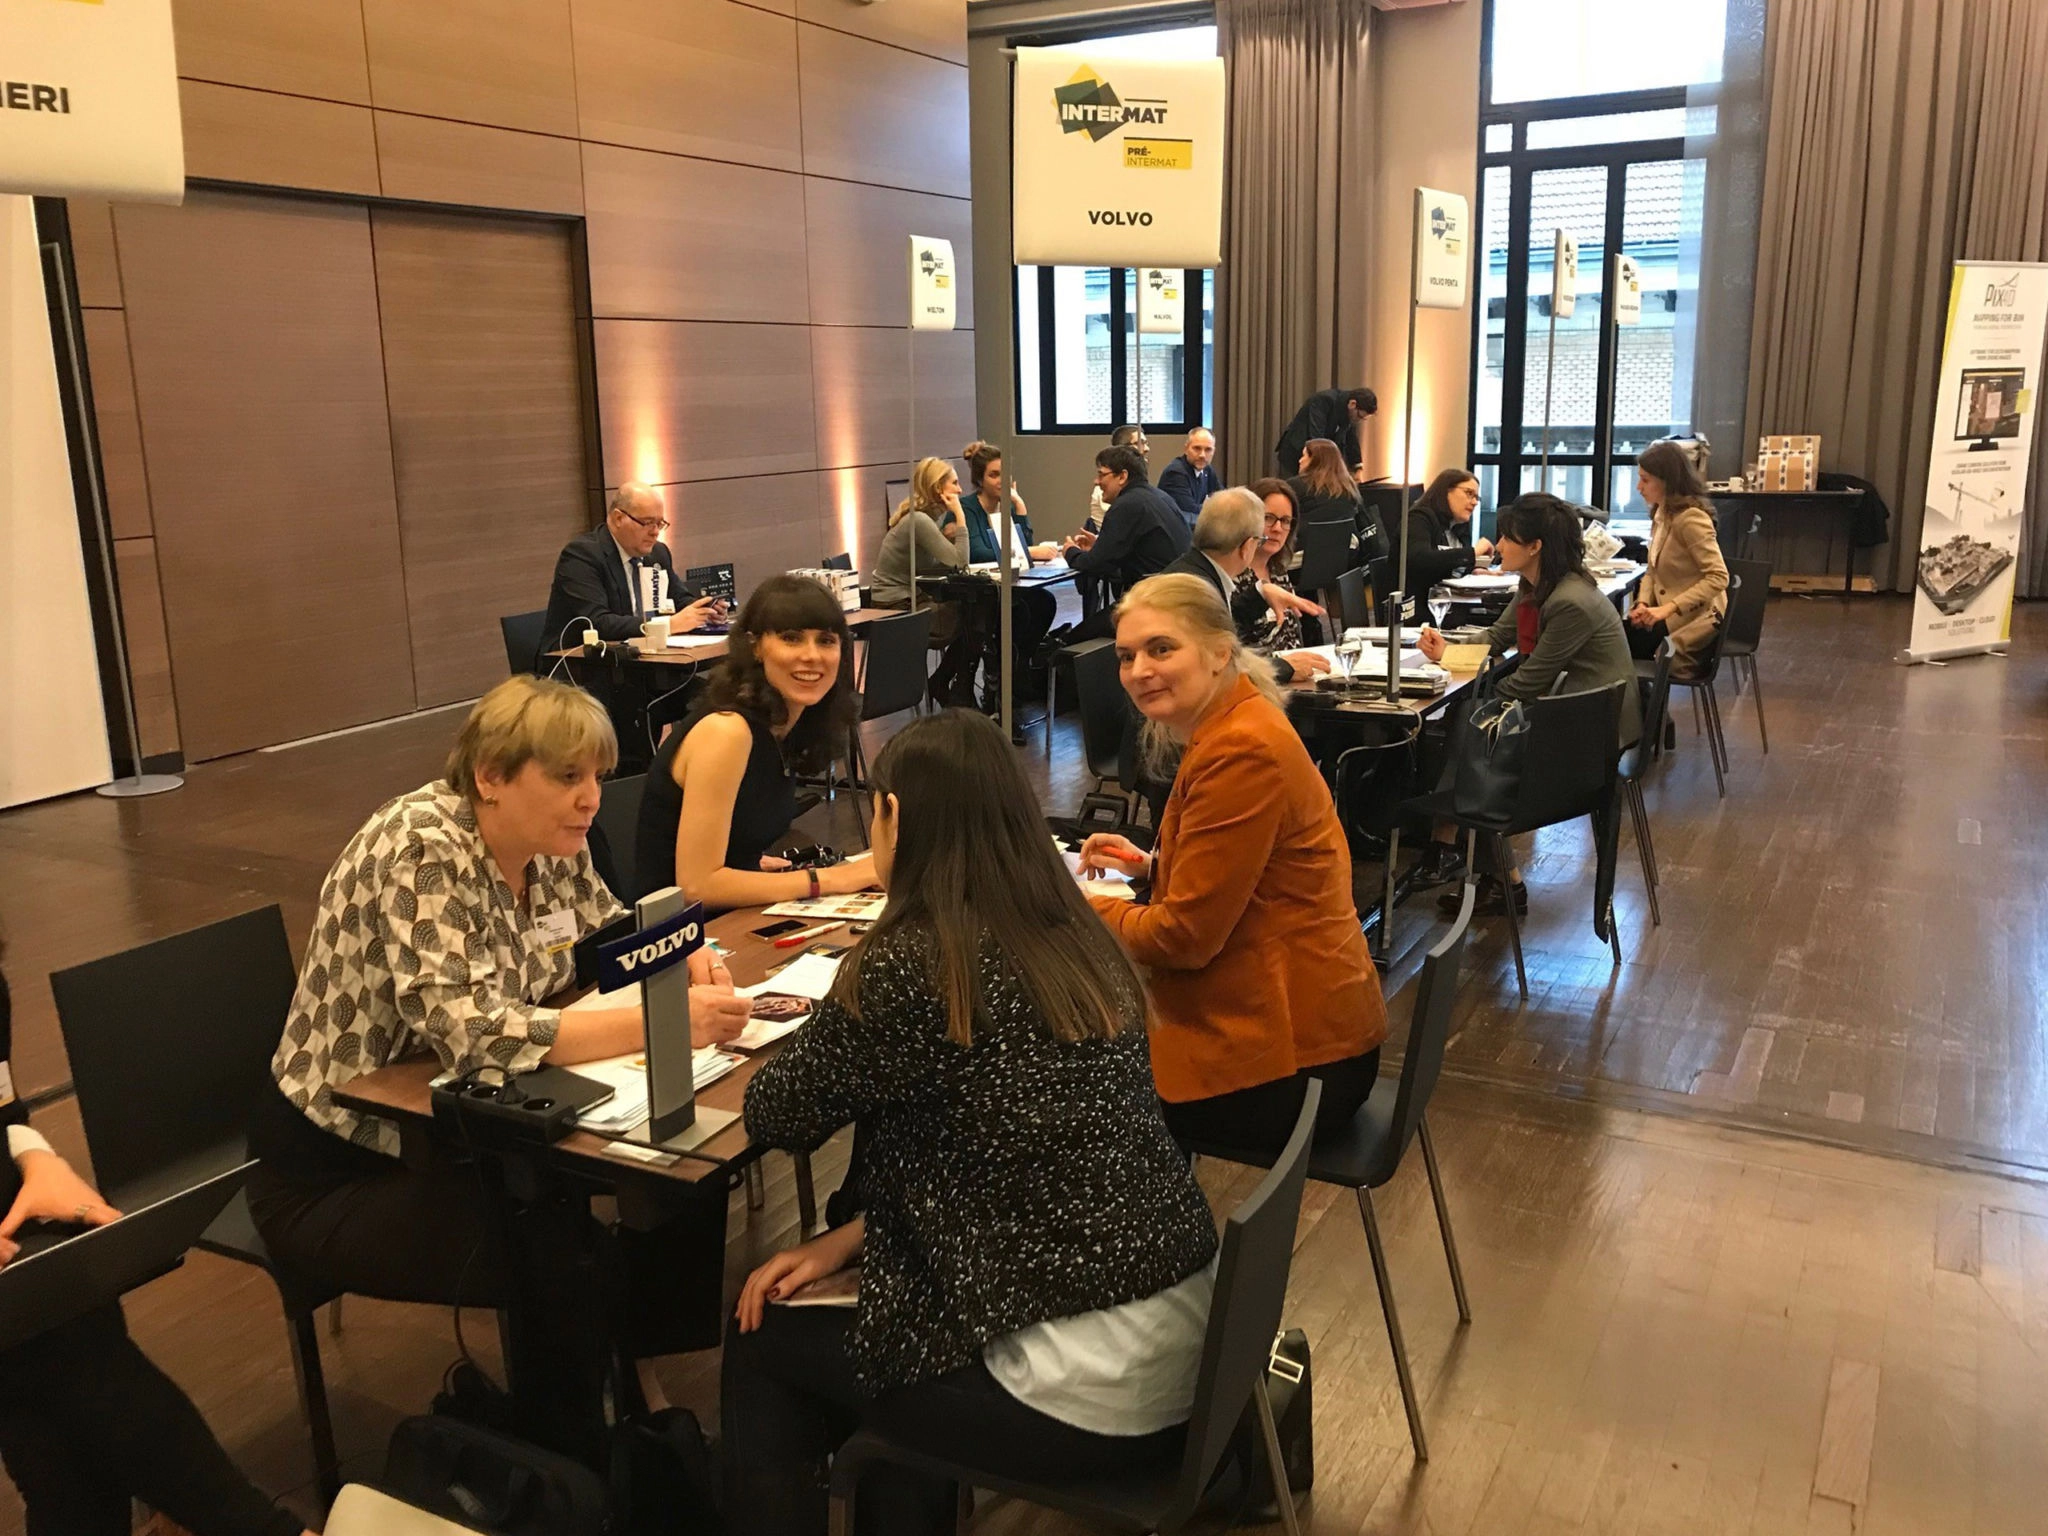 meeting-journalists-at-the-pre-intermat-press-event-in-paris-france-2018-2048x1536